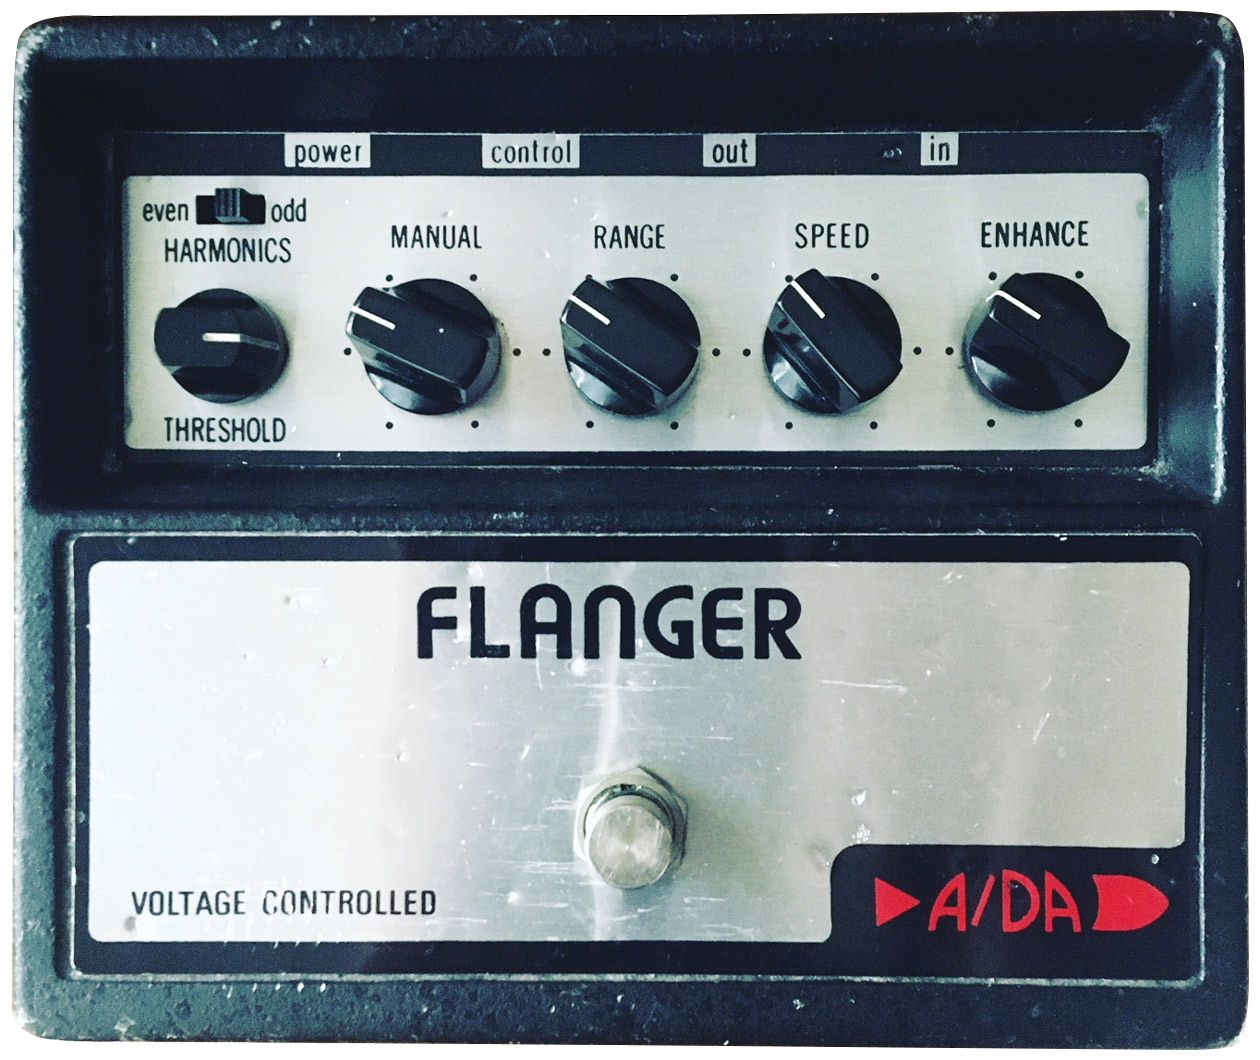 State of the Stomp: Reflections on an A/DA Flanger